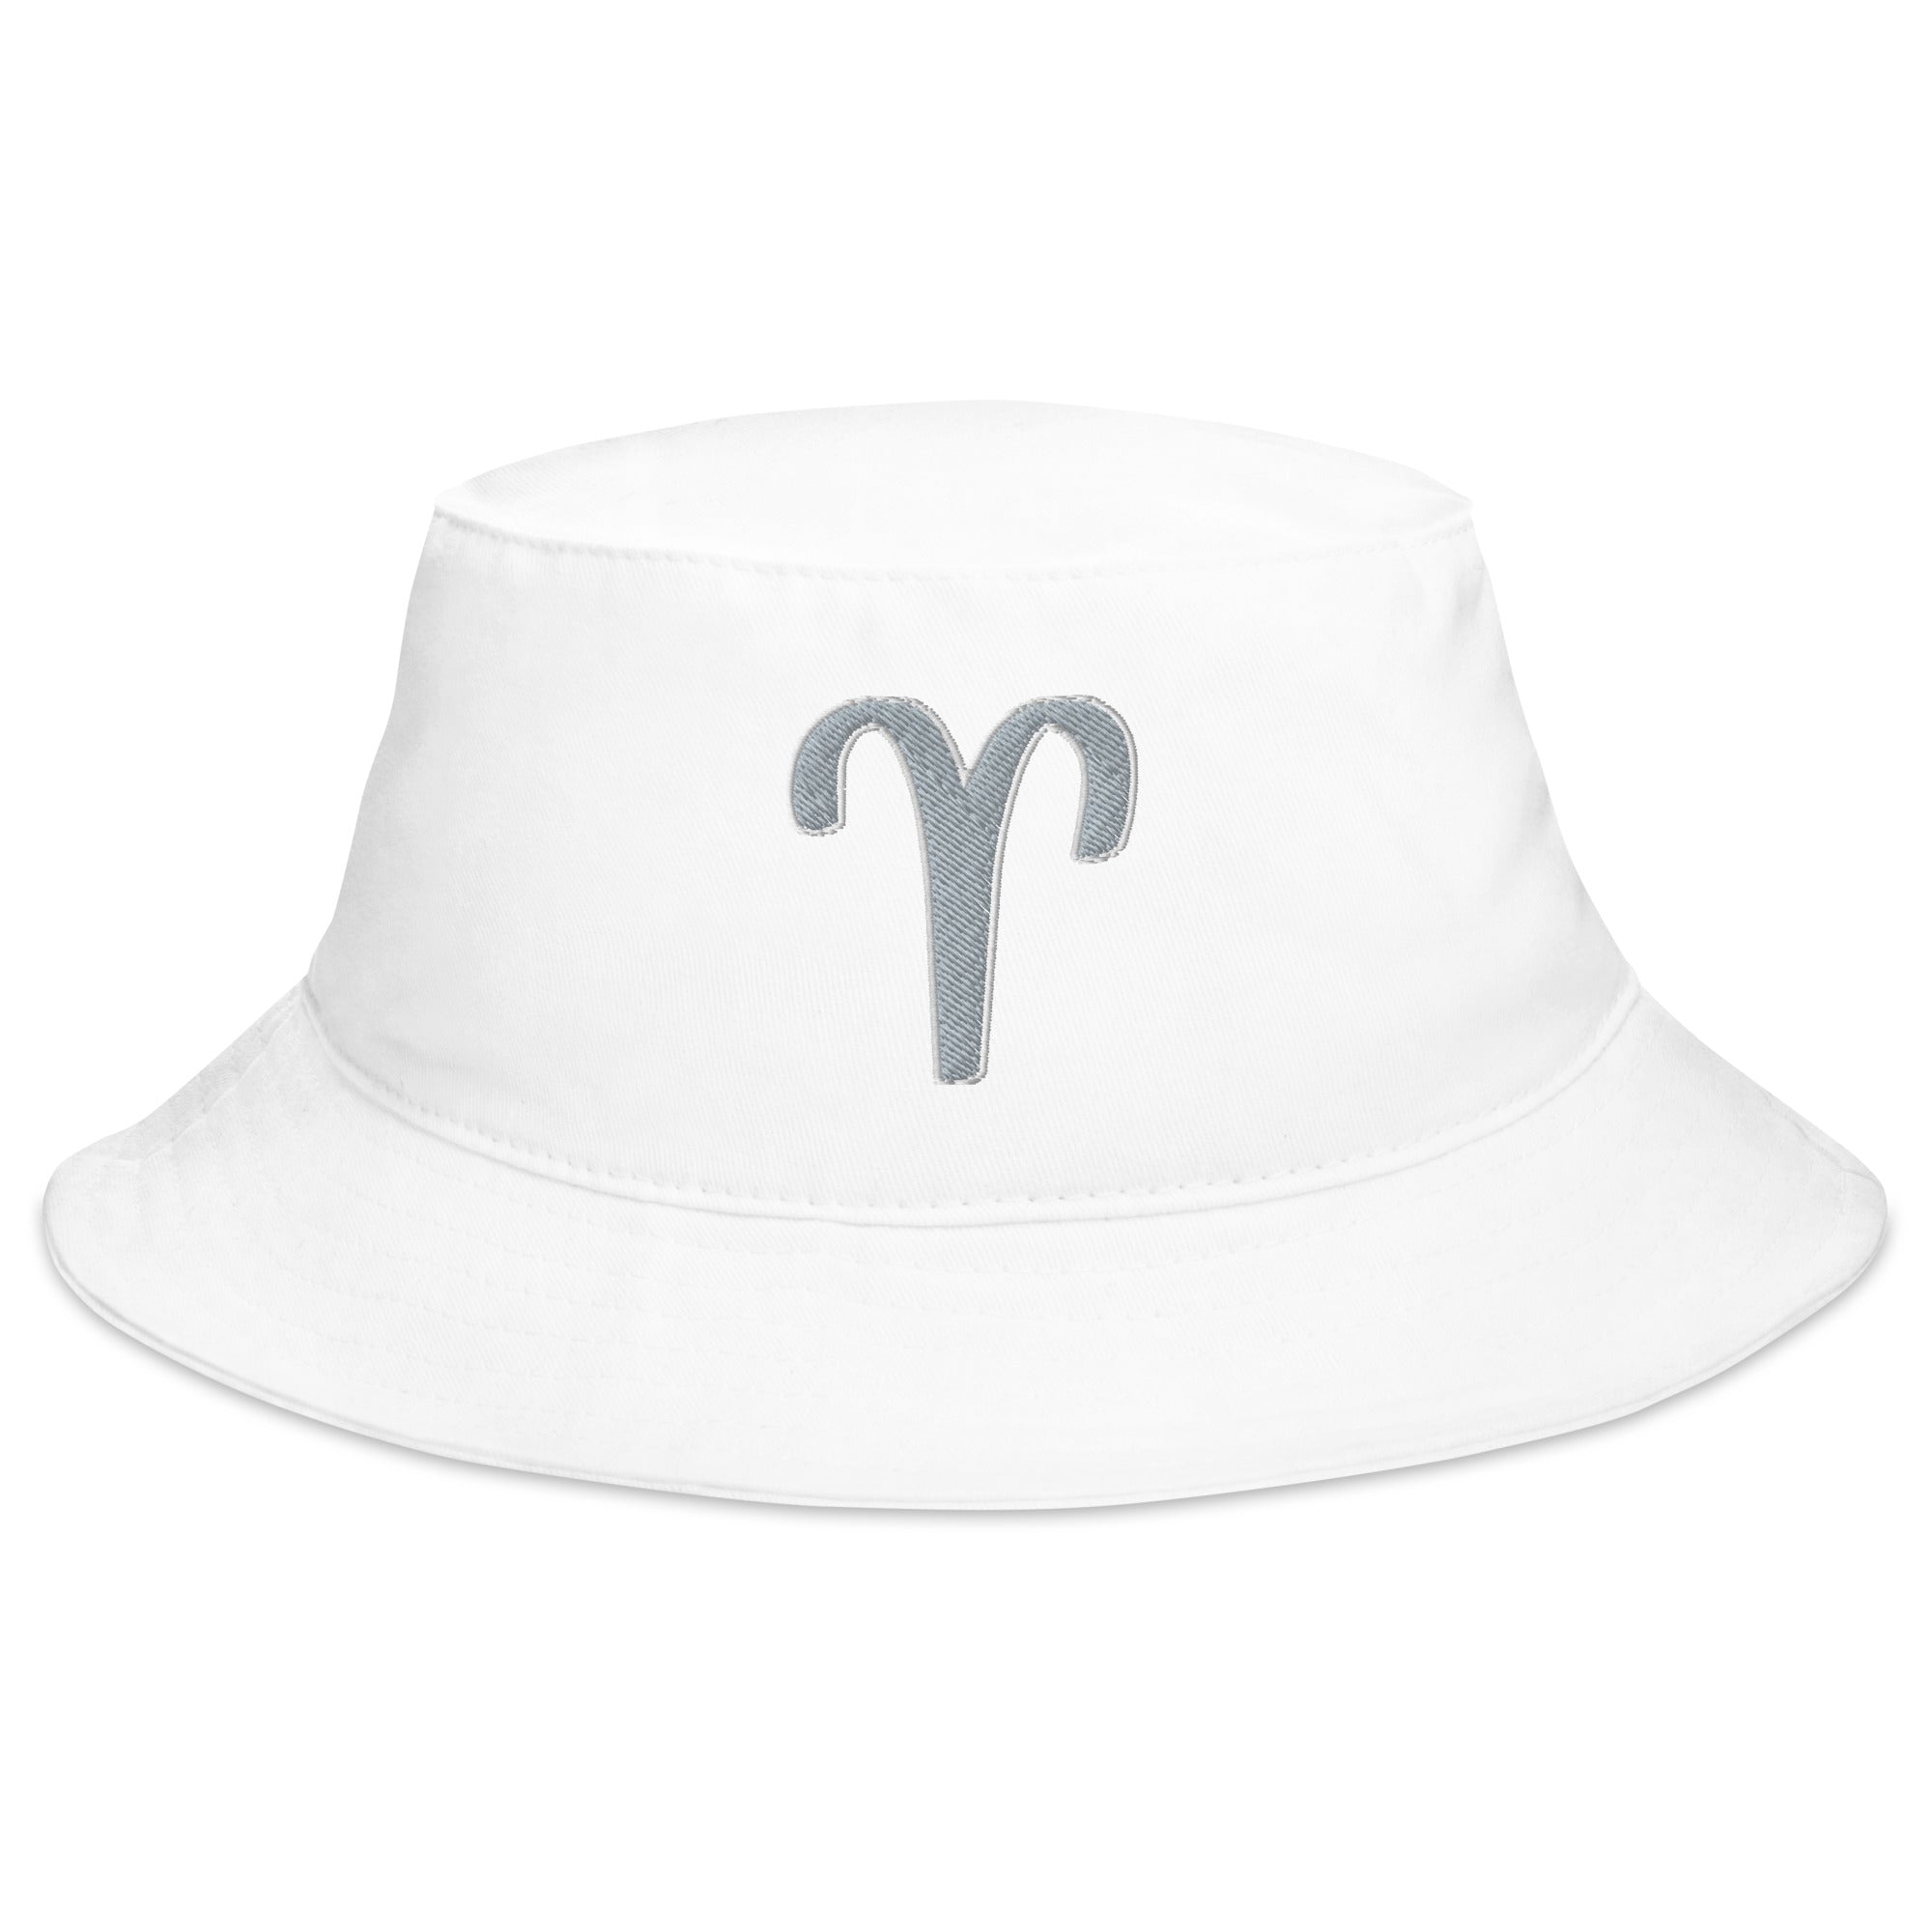 Zodiac Sign Aries Embroidered Bucket Hat Astrology Horoscope